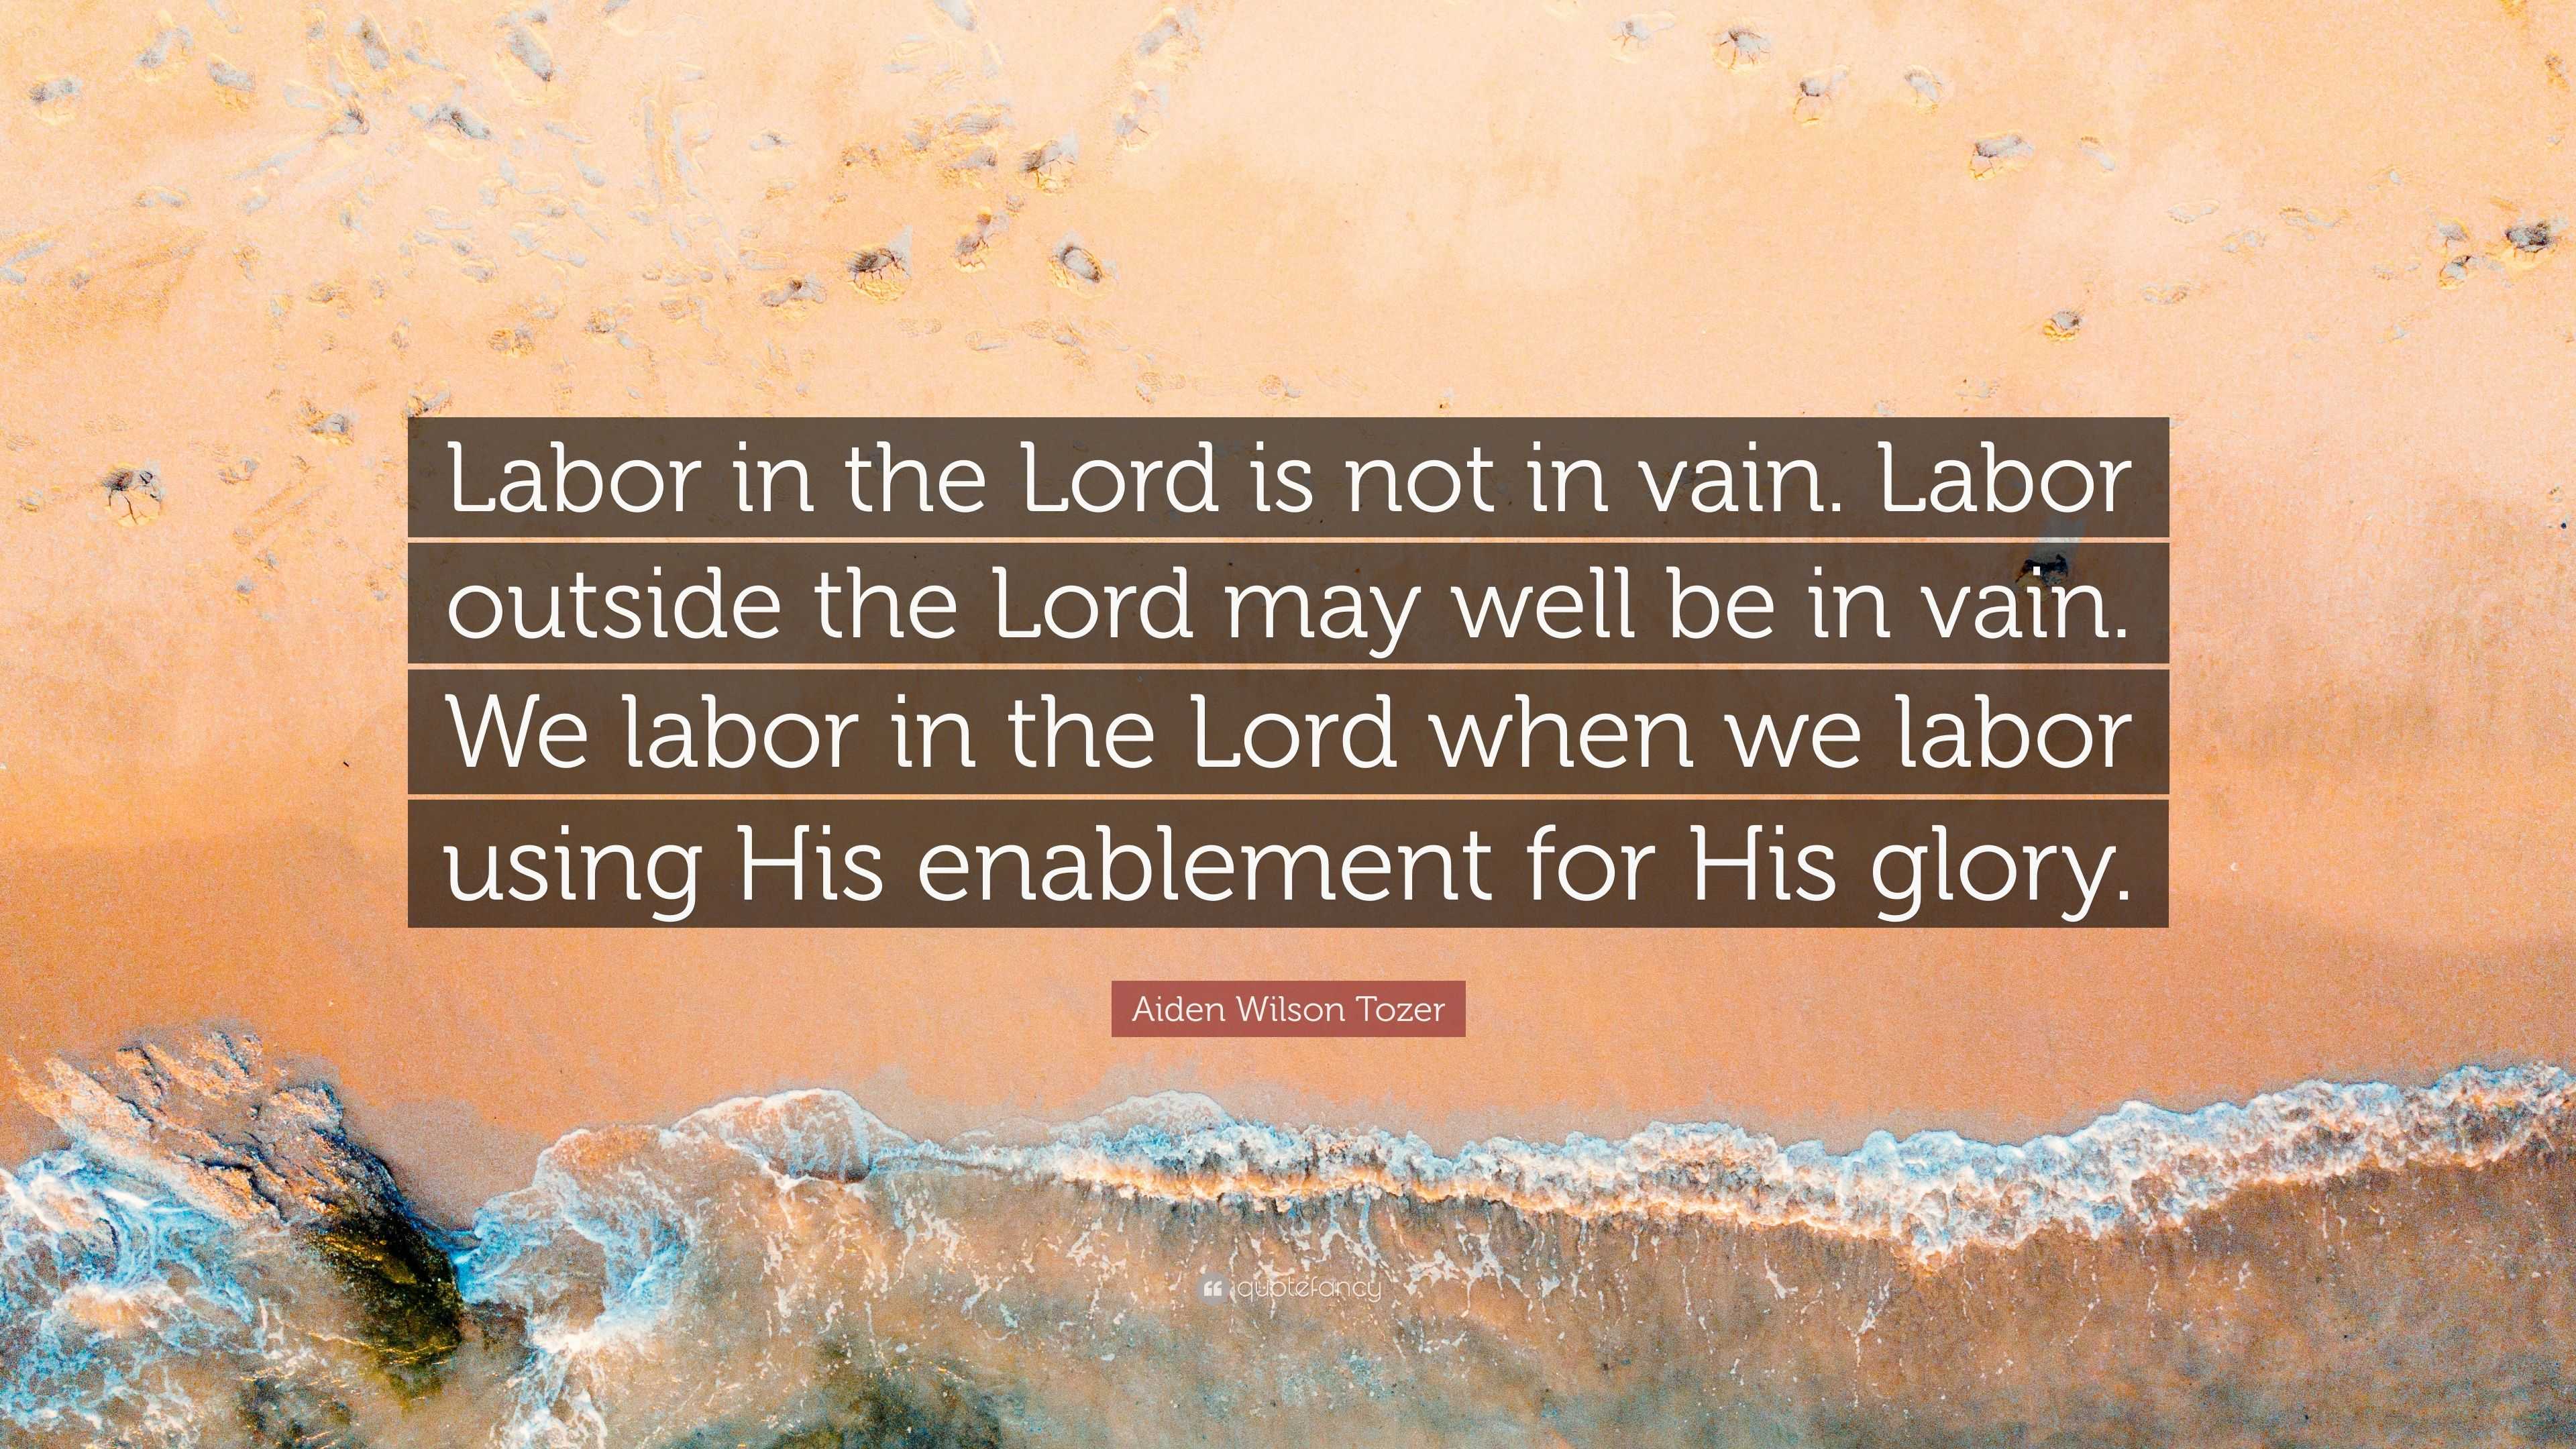 Aiden Wilson Tozer Quote: “Labor In The Lord Is Not In Vain. Labor Outside  The Lord May Well Be In Vain. We Labor In The Lord When We Labor Using H...”